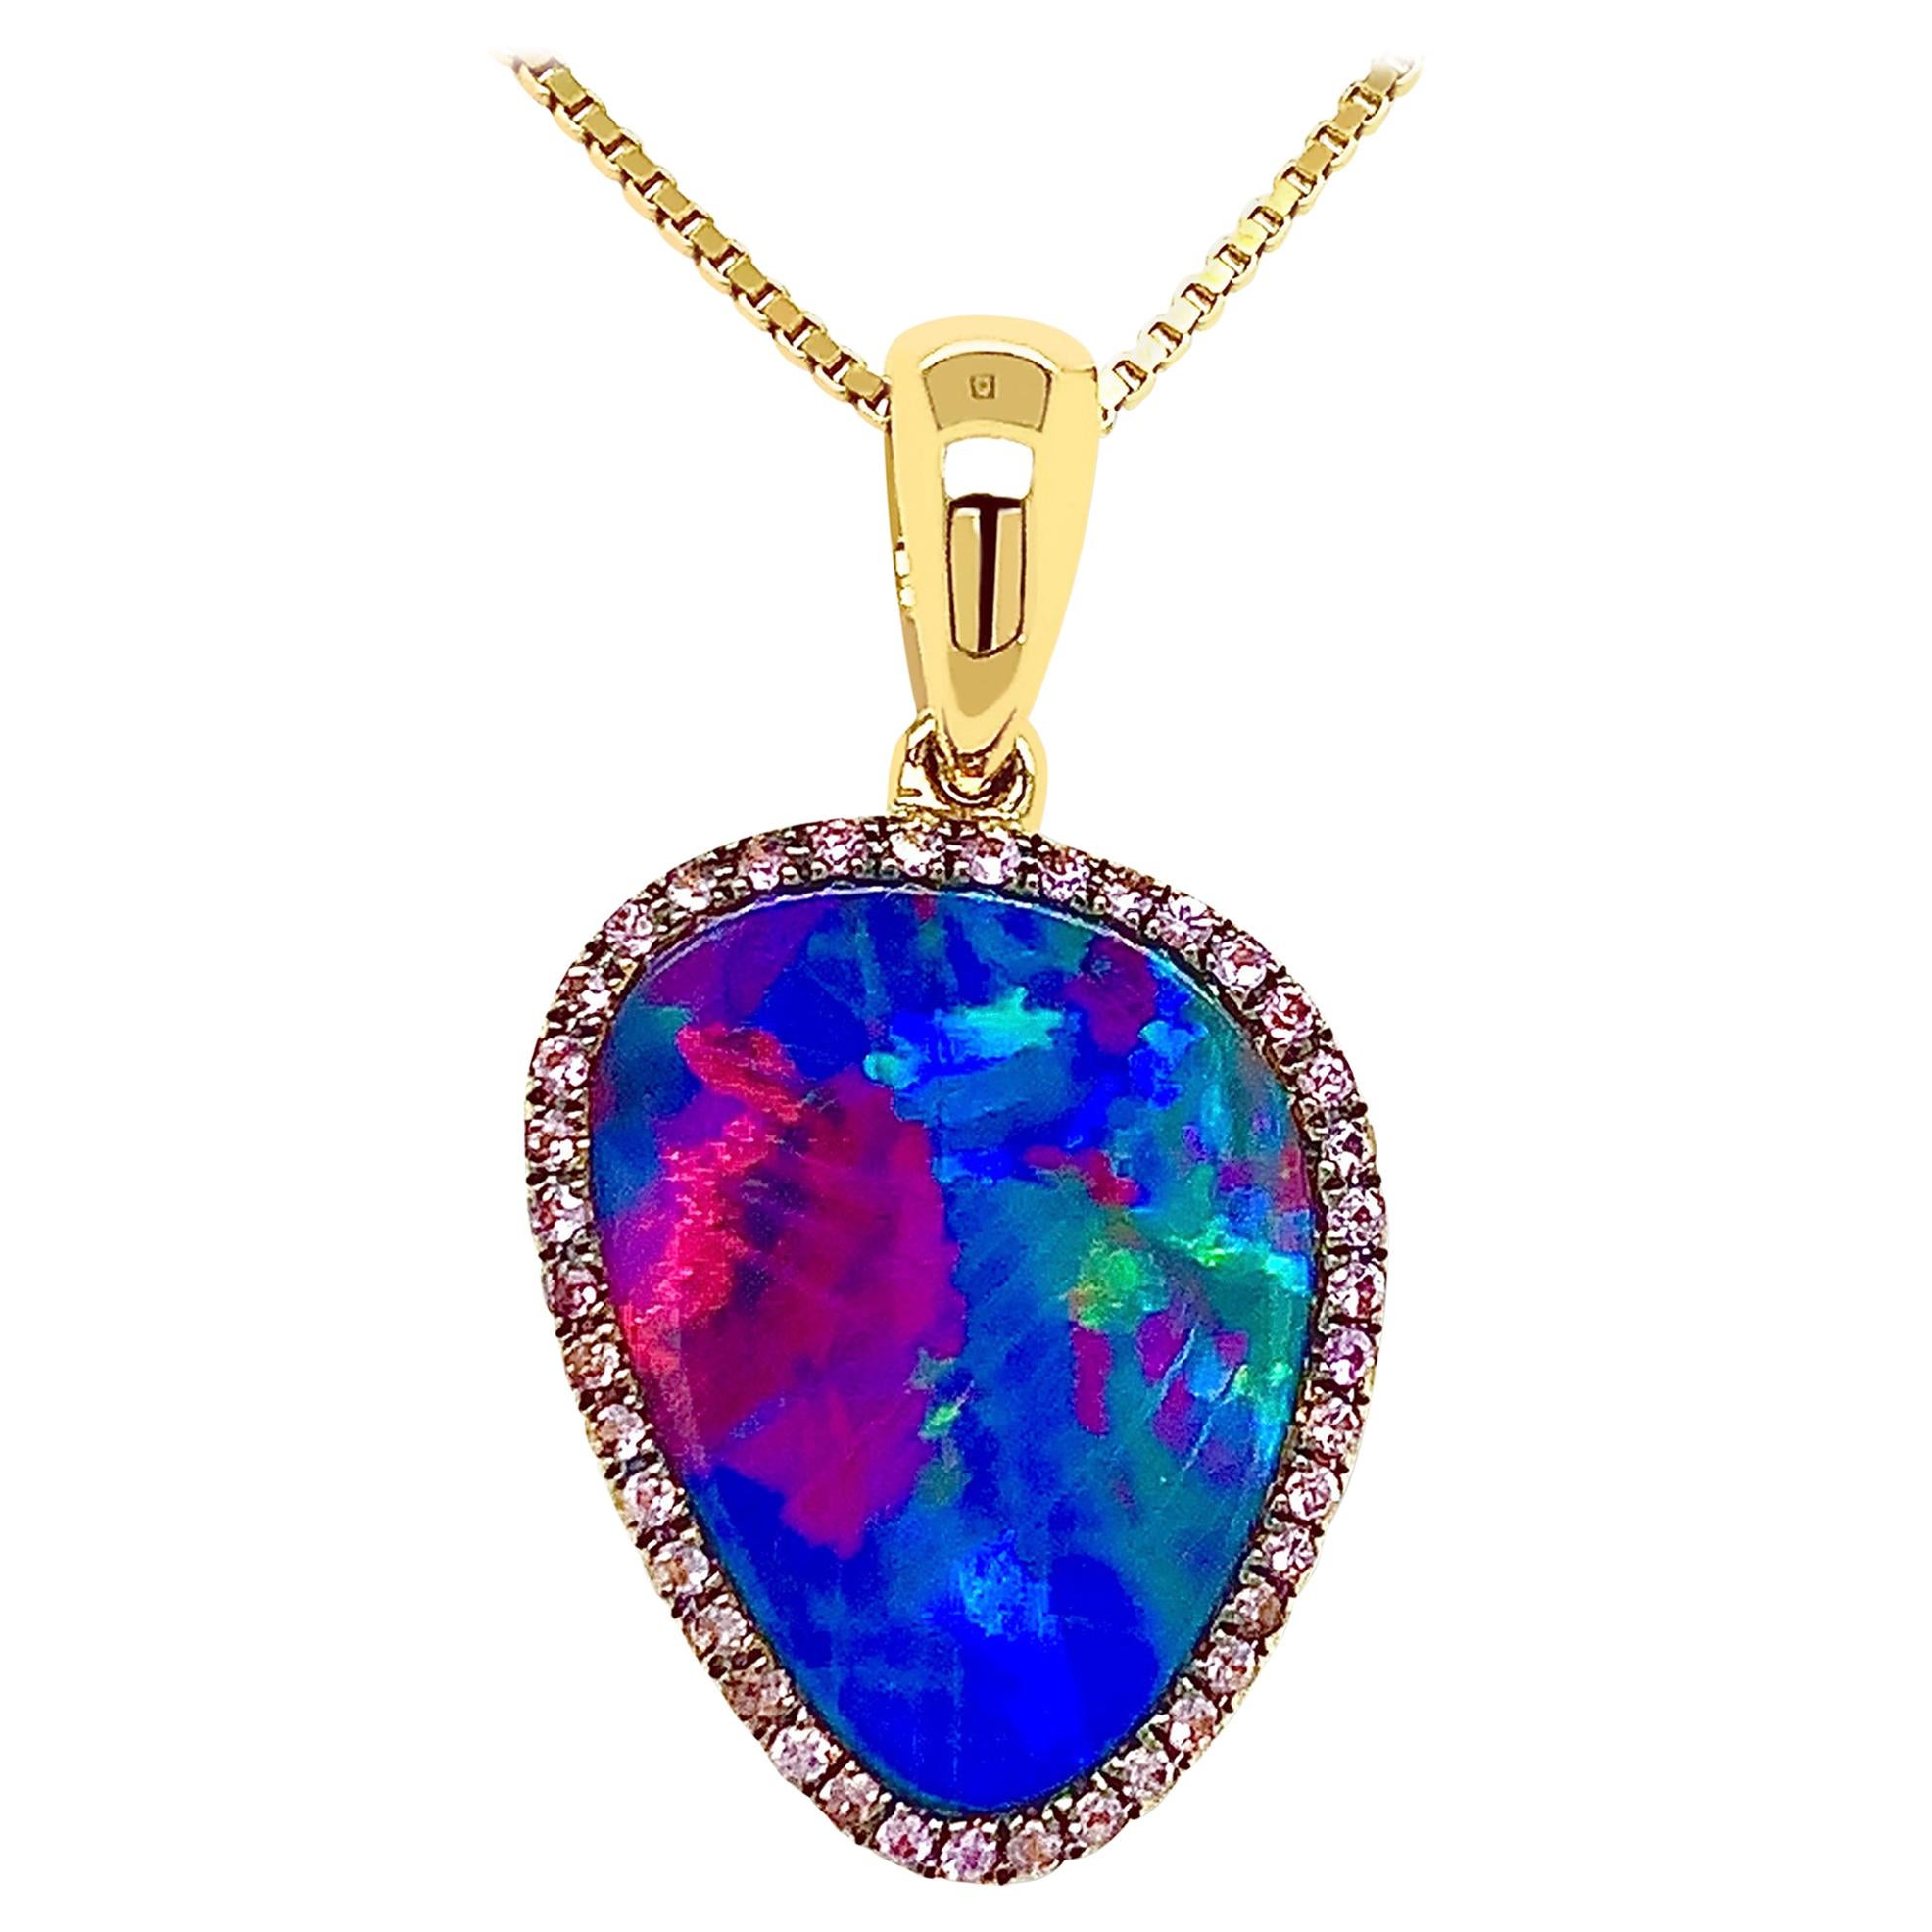 Australian 4.87ct Premium Opal Doublet and Diamond Necklace in 18K Yellow Gold